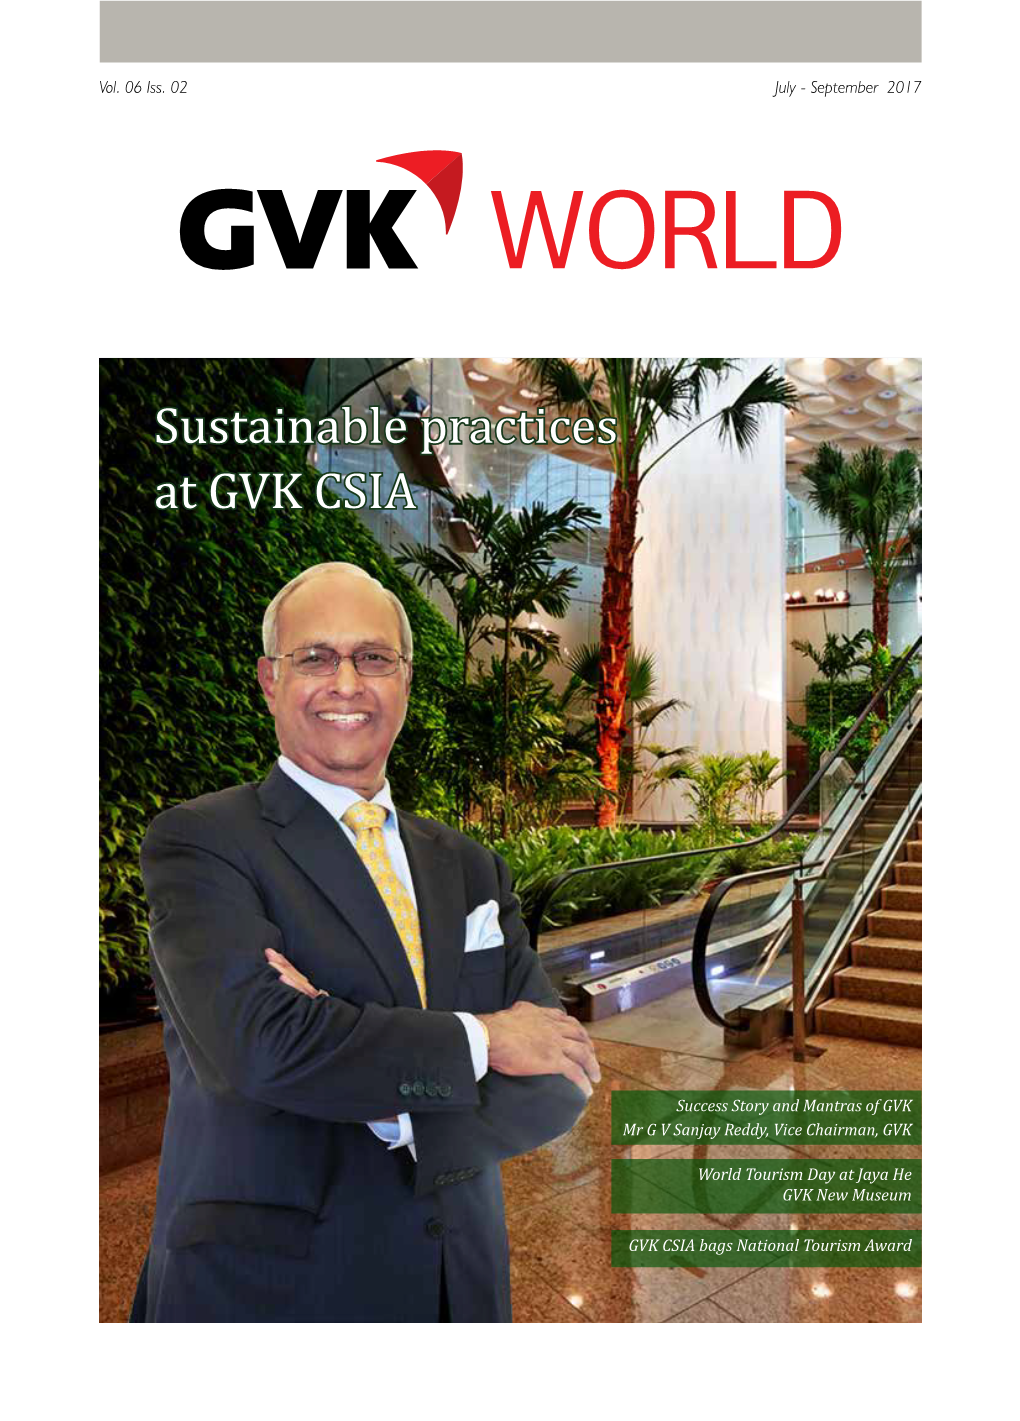 Sustainable Practices at GVK CSIA